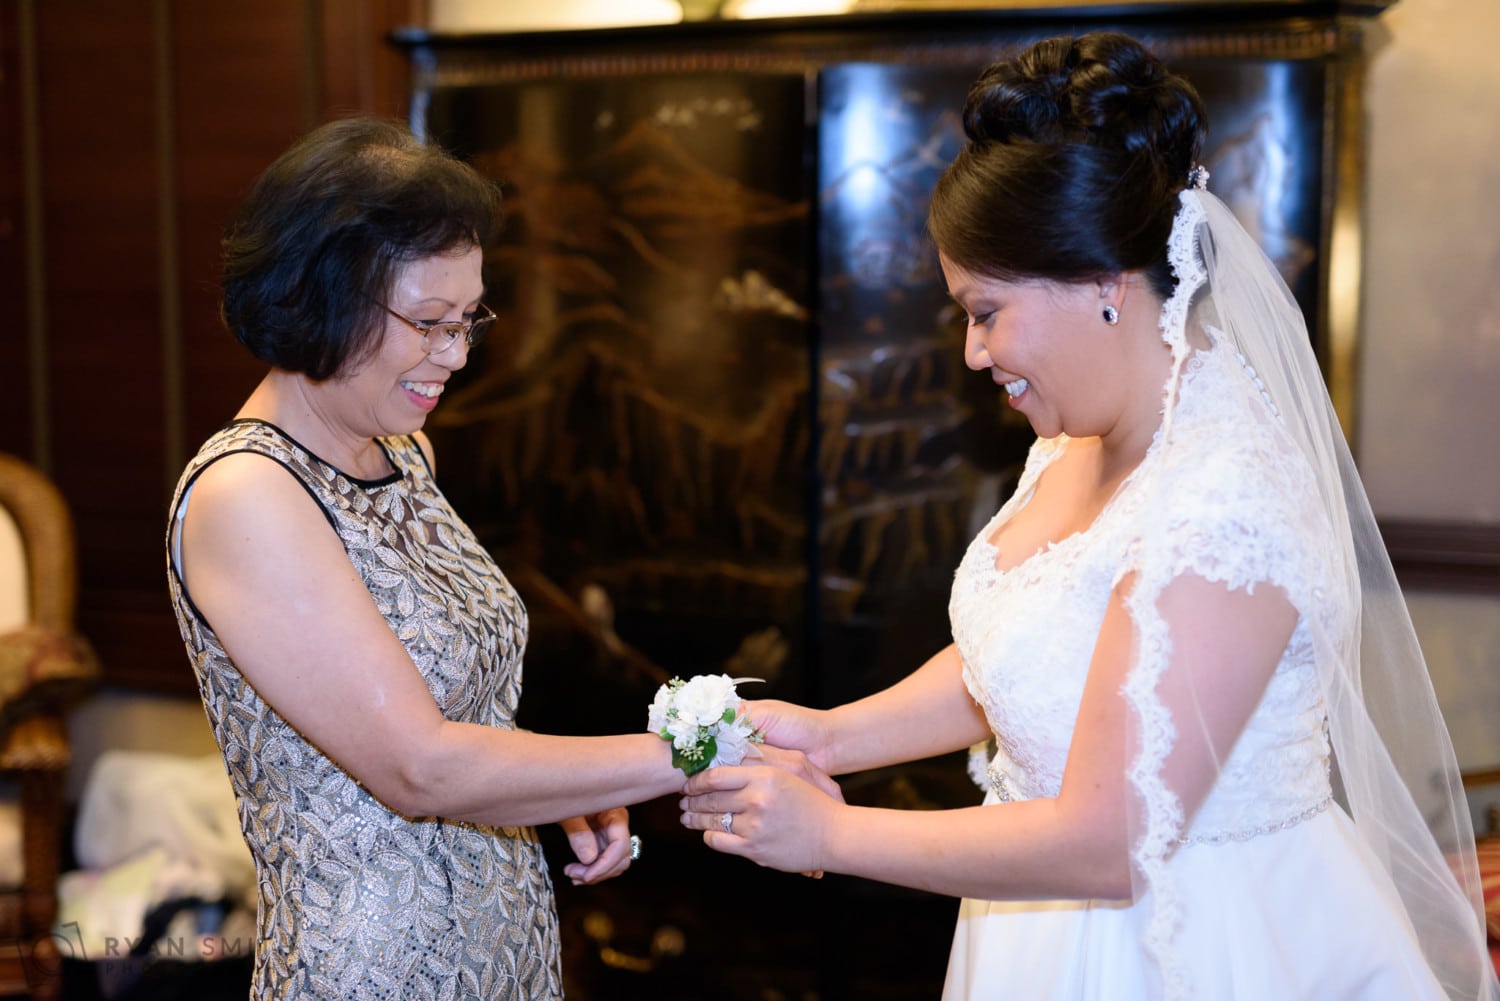 Bride putting corsage on her mom - Dye Club at Barefoot Resort